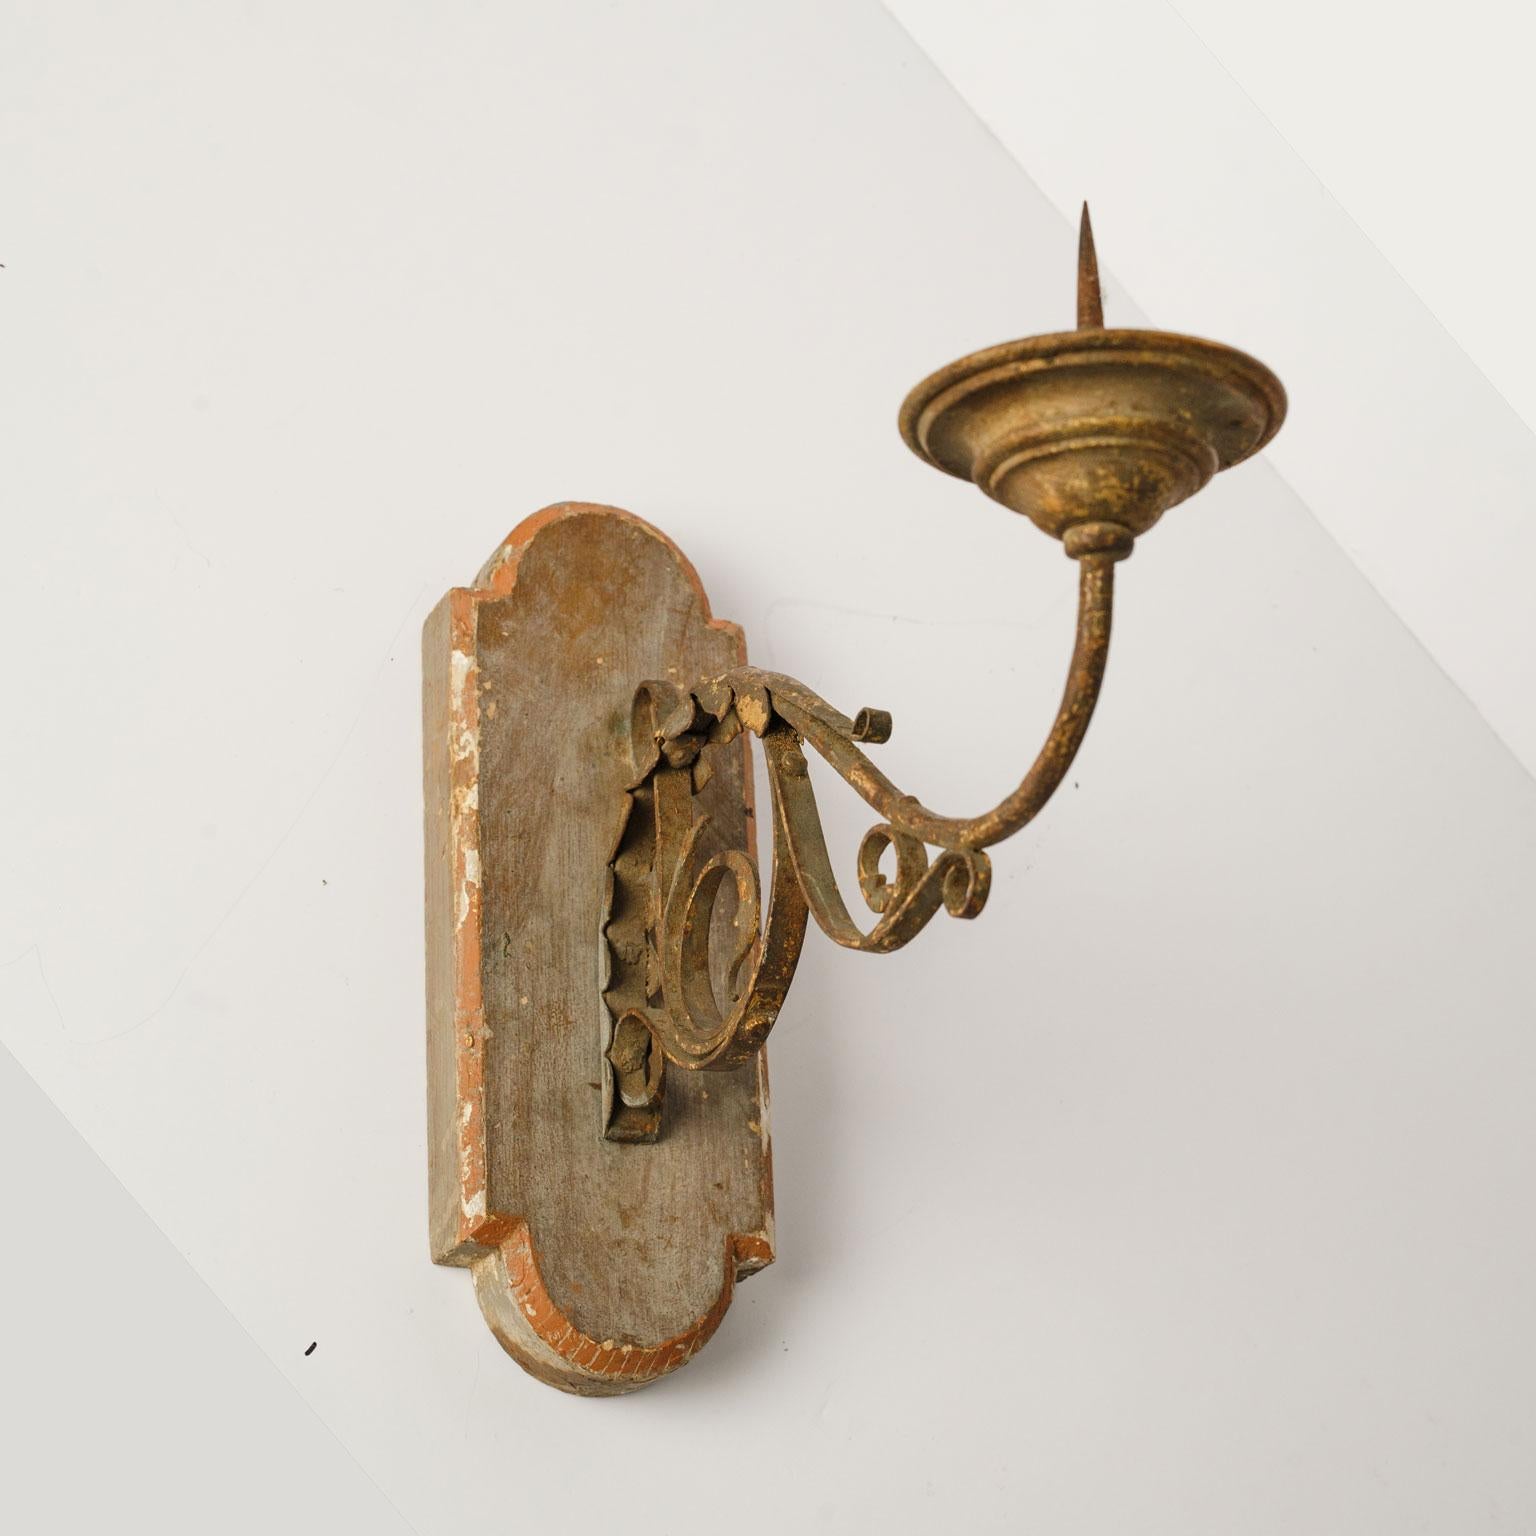 Exquisite wood and iron sconce with single arm. Beautiful original (or early paint) paint over gesso applied over surface of wooden back. Back is hand carved. Single forged iron arm decorated with hammered scrolling acanthus detail. Remnants of old